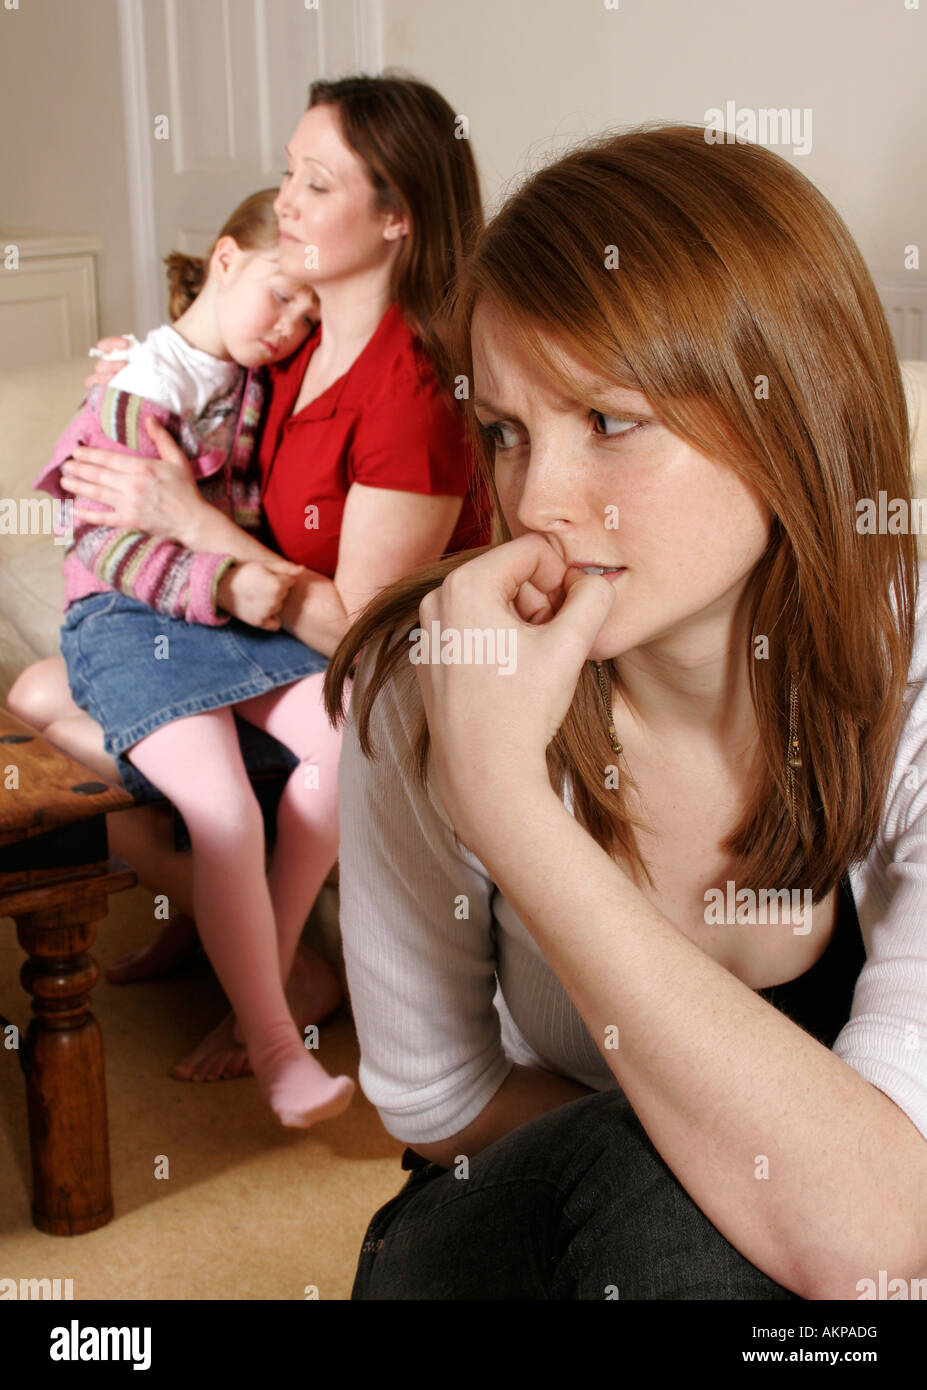 Mother comforting little girl and concerned young woman in foreground Stock Photo